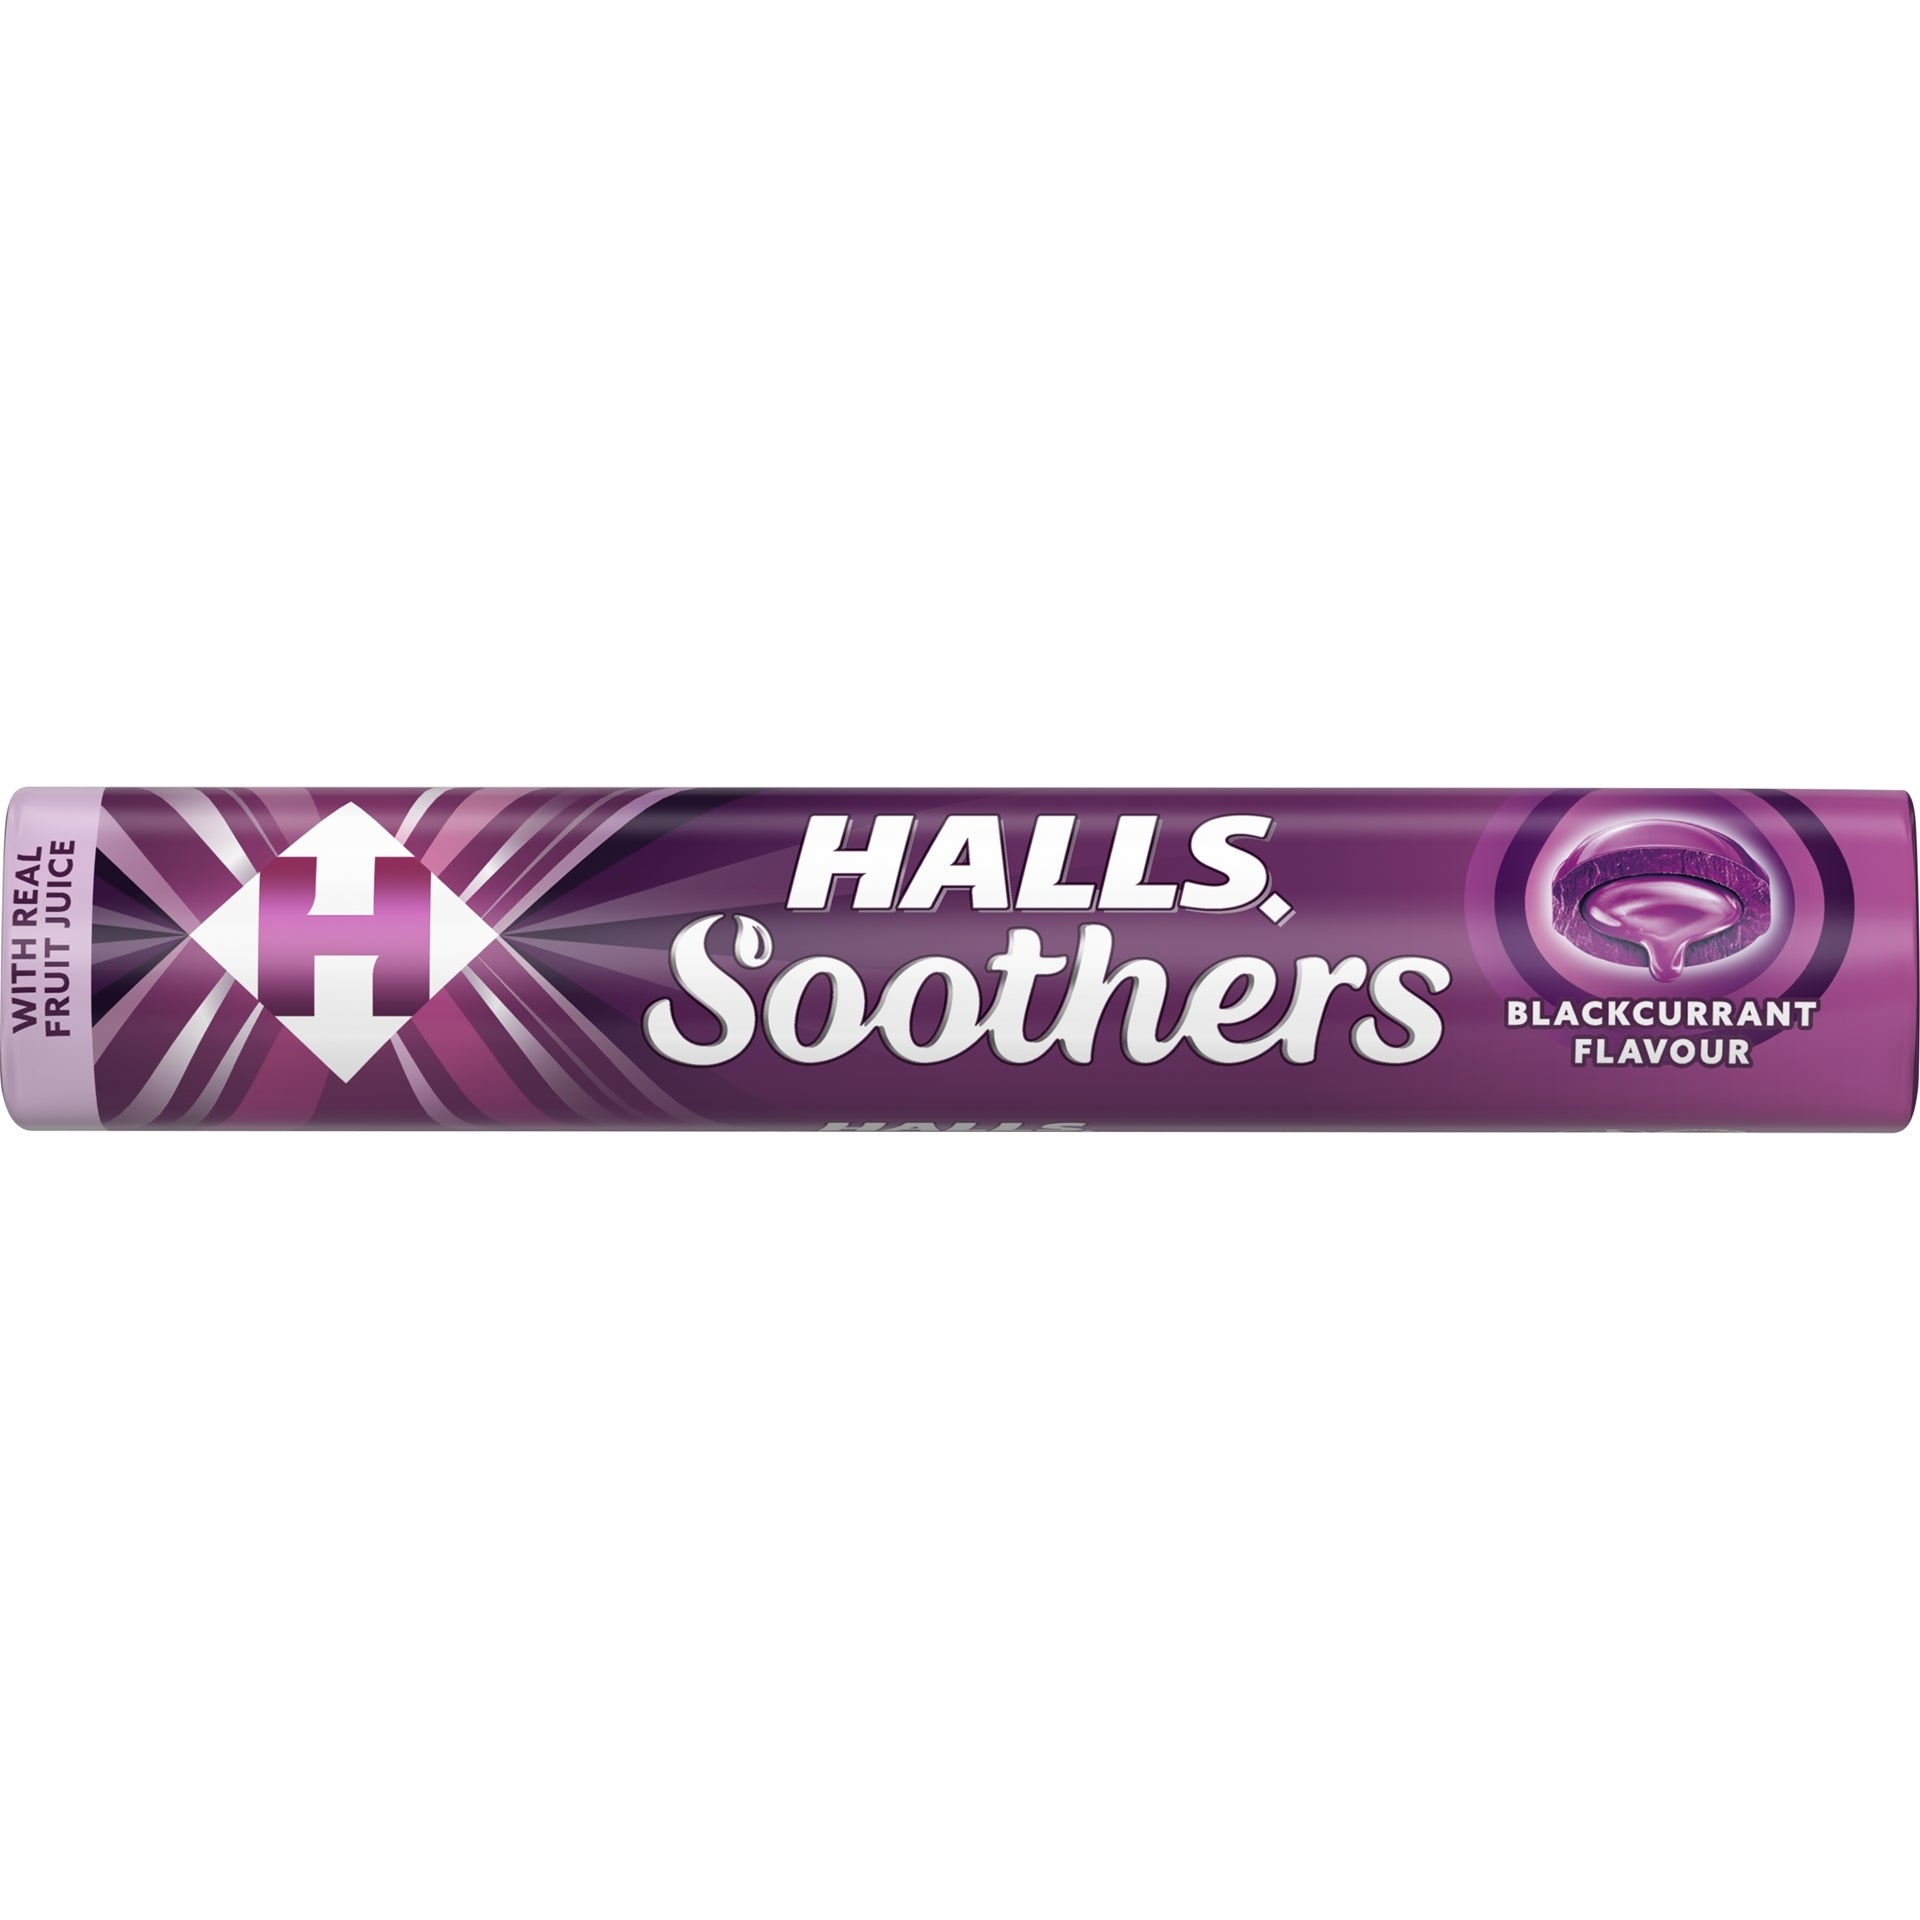 SOOTHERS BLACKCURRANT X 20